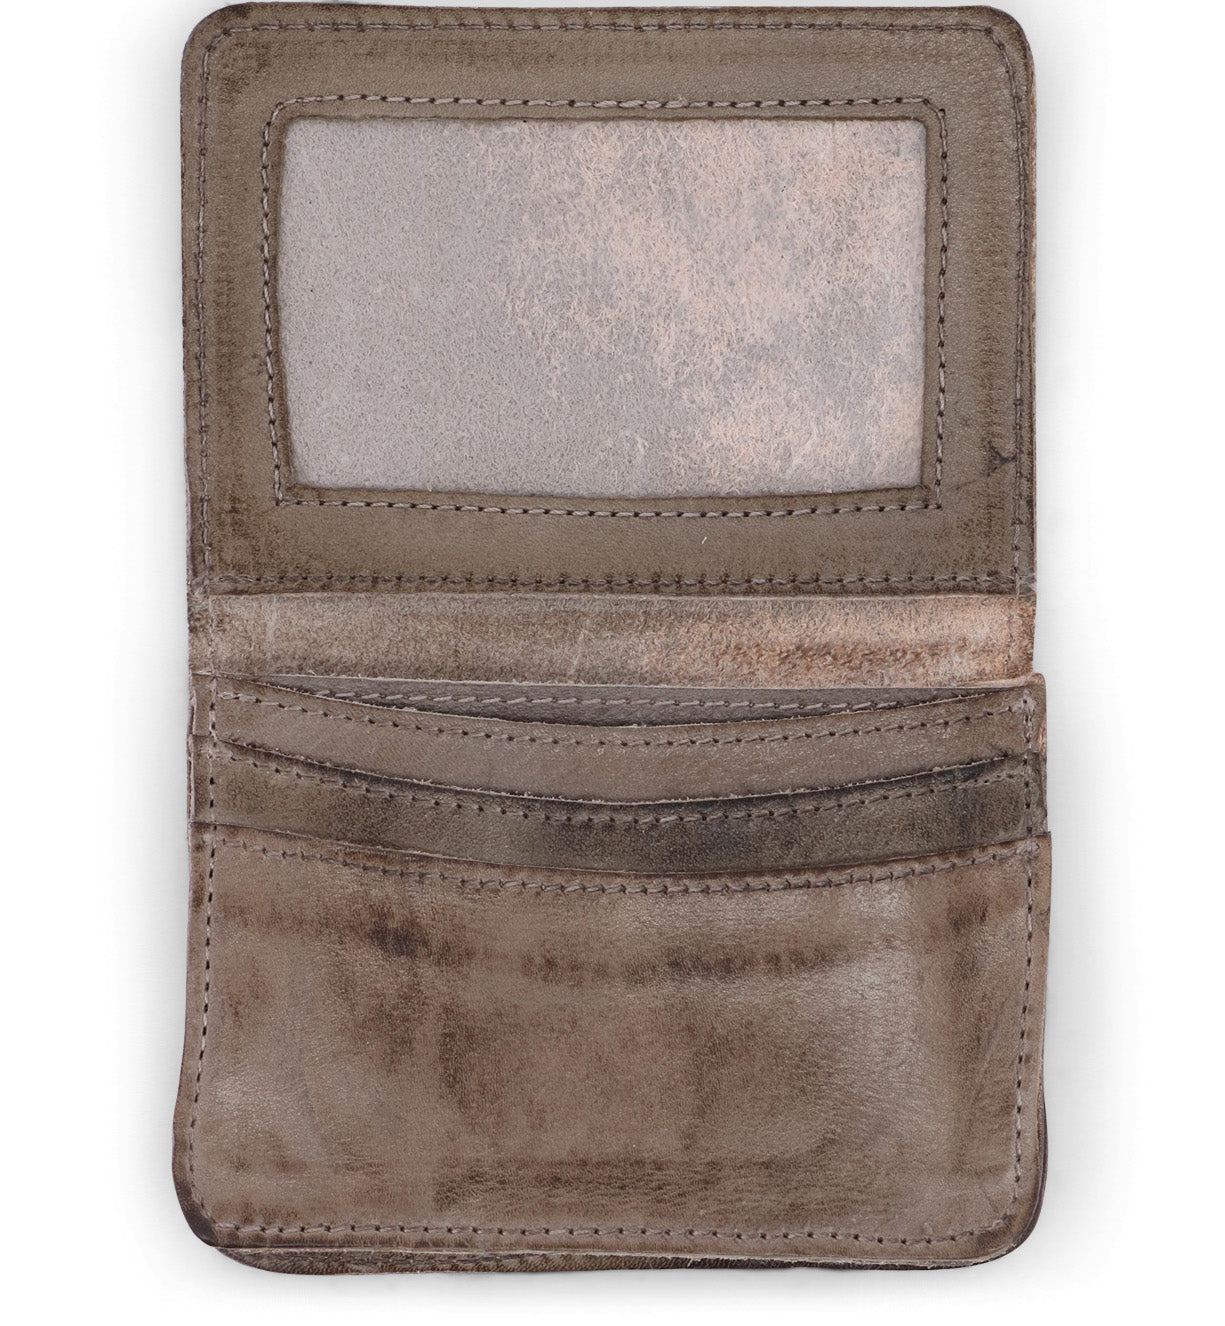 A brown leather Jeor wallet with an open compartment by Bed Stu.